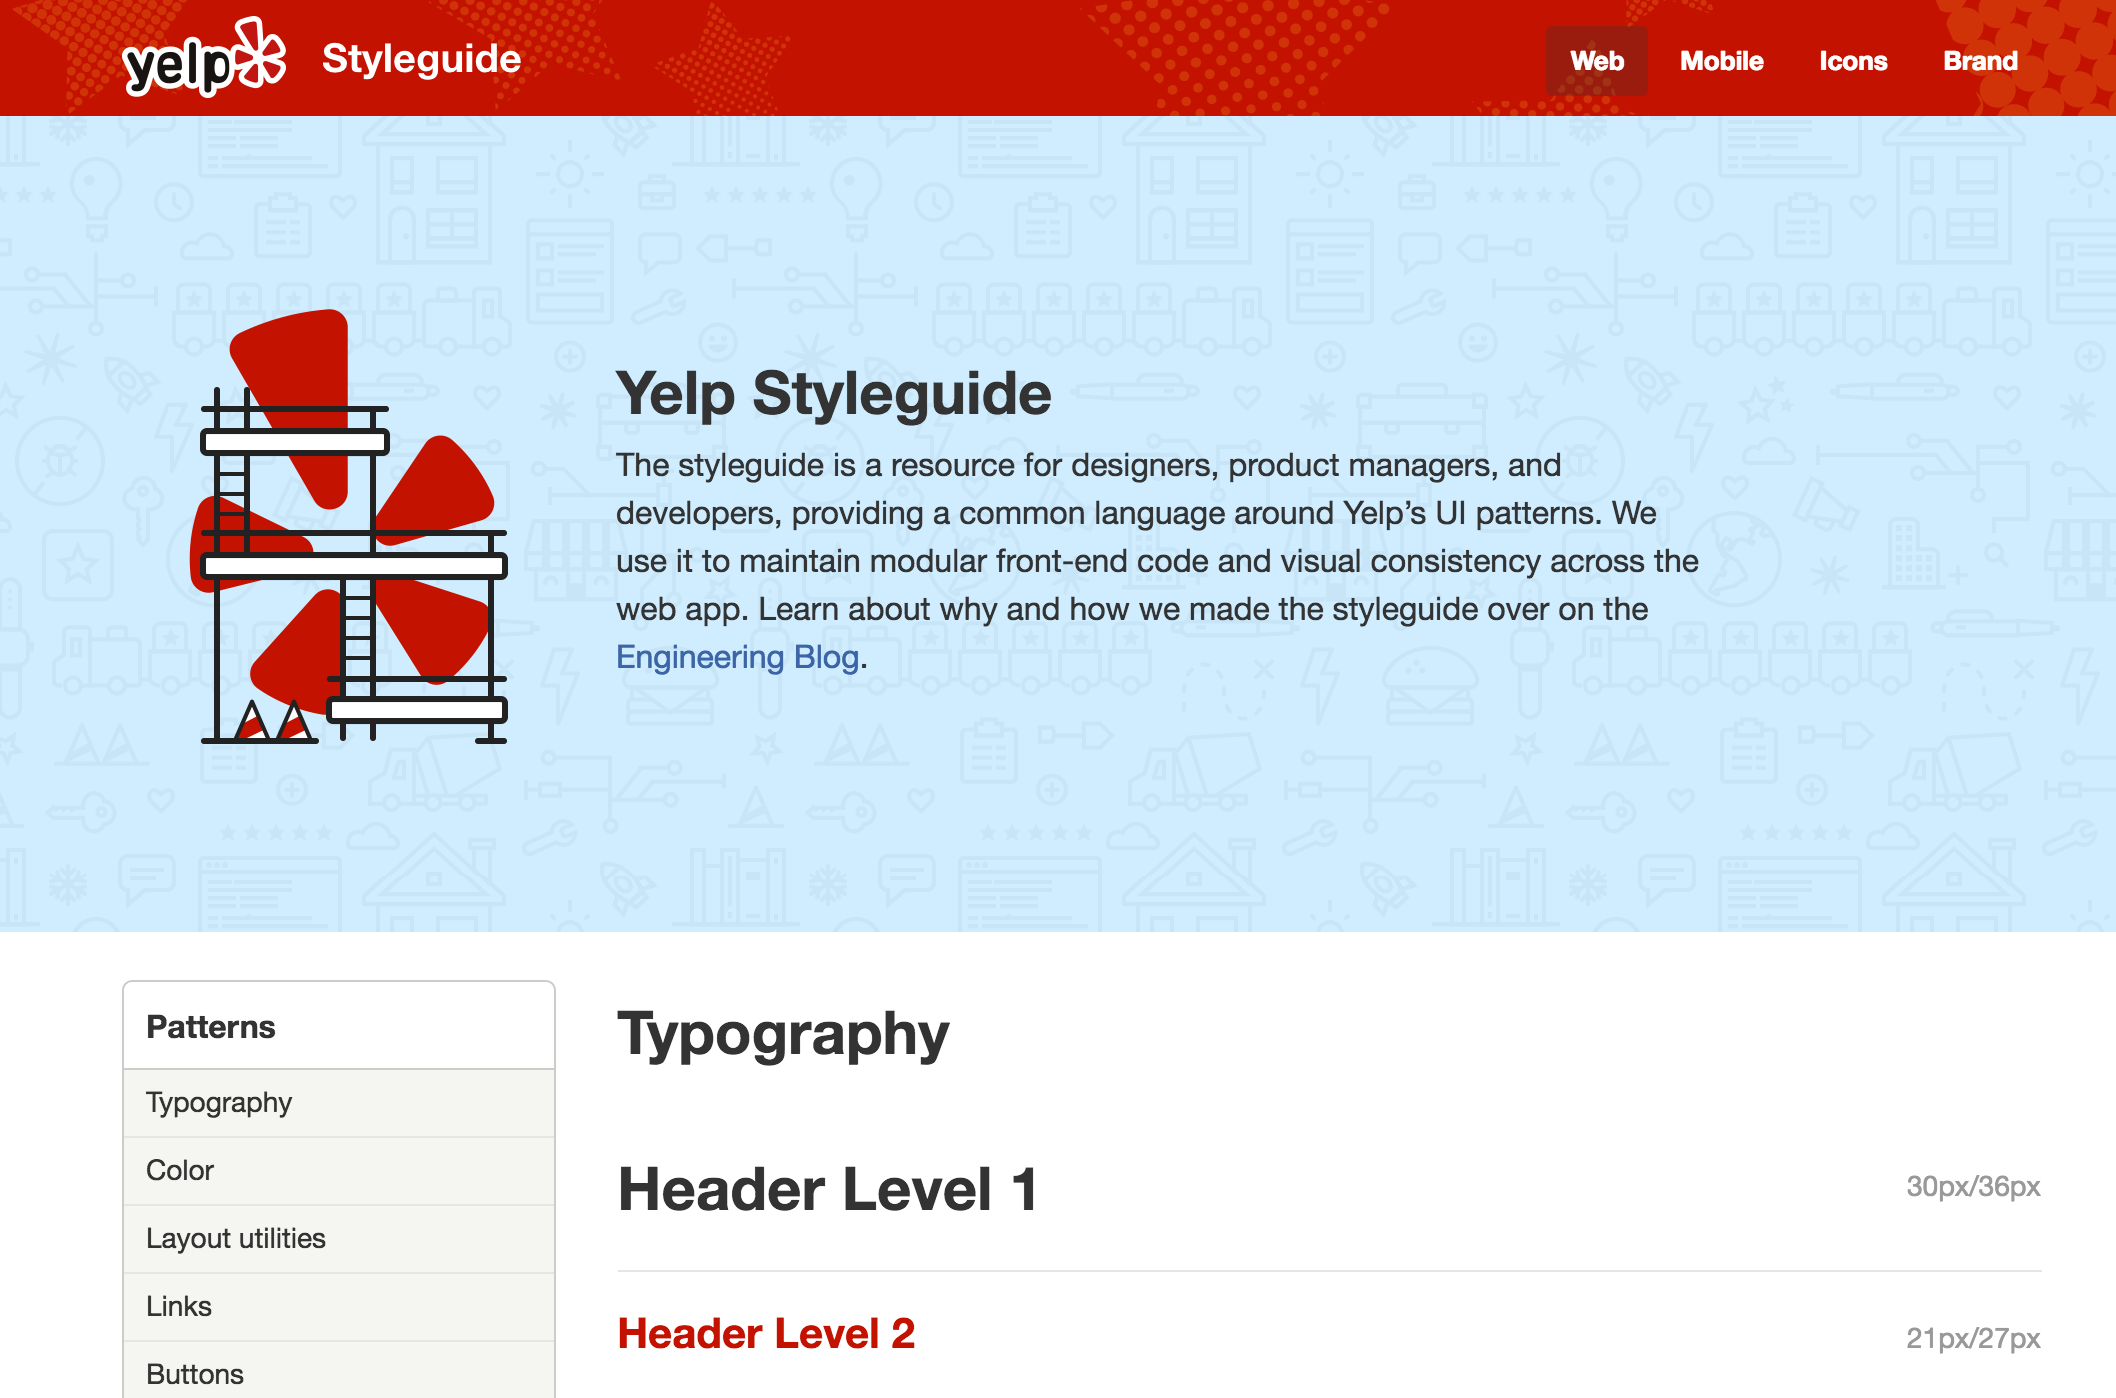 Yelp's style guide has an attractive, friendly front page that explains what the resource is, who it's for, and how to use it.